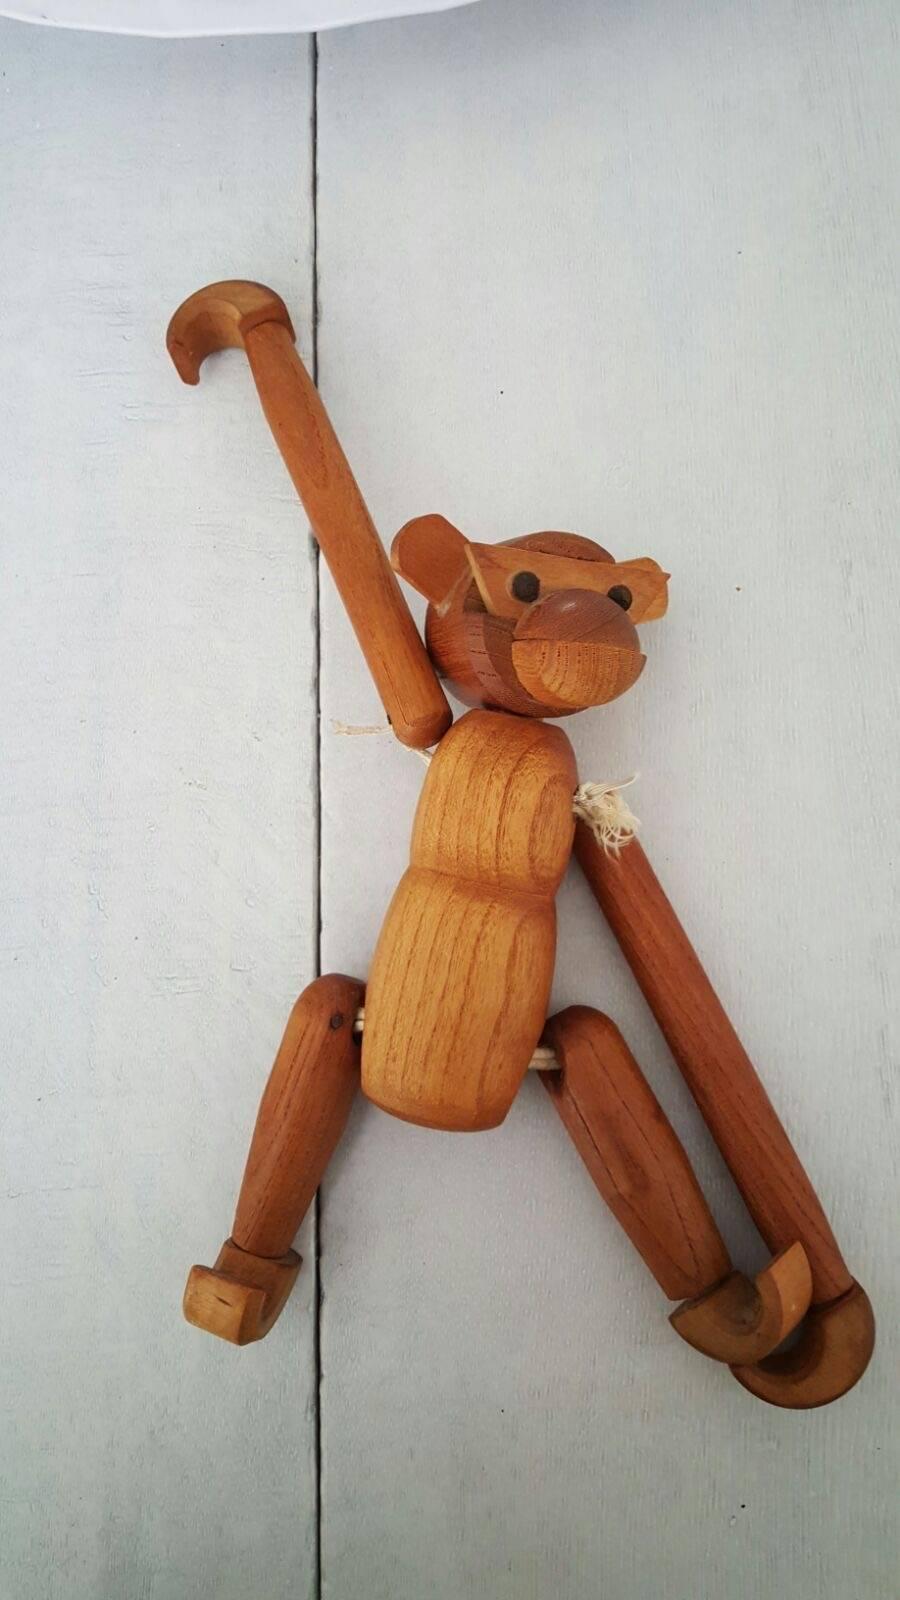 Famous Danish old monkey, designed by Kay Bojesen.

This teakwood design monkey has movable head, arms and legs and it is in good condition. It is 8 inches in height and worldwide shipment is included in the price.

We have a passion for the